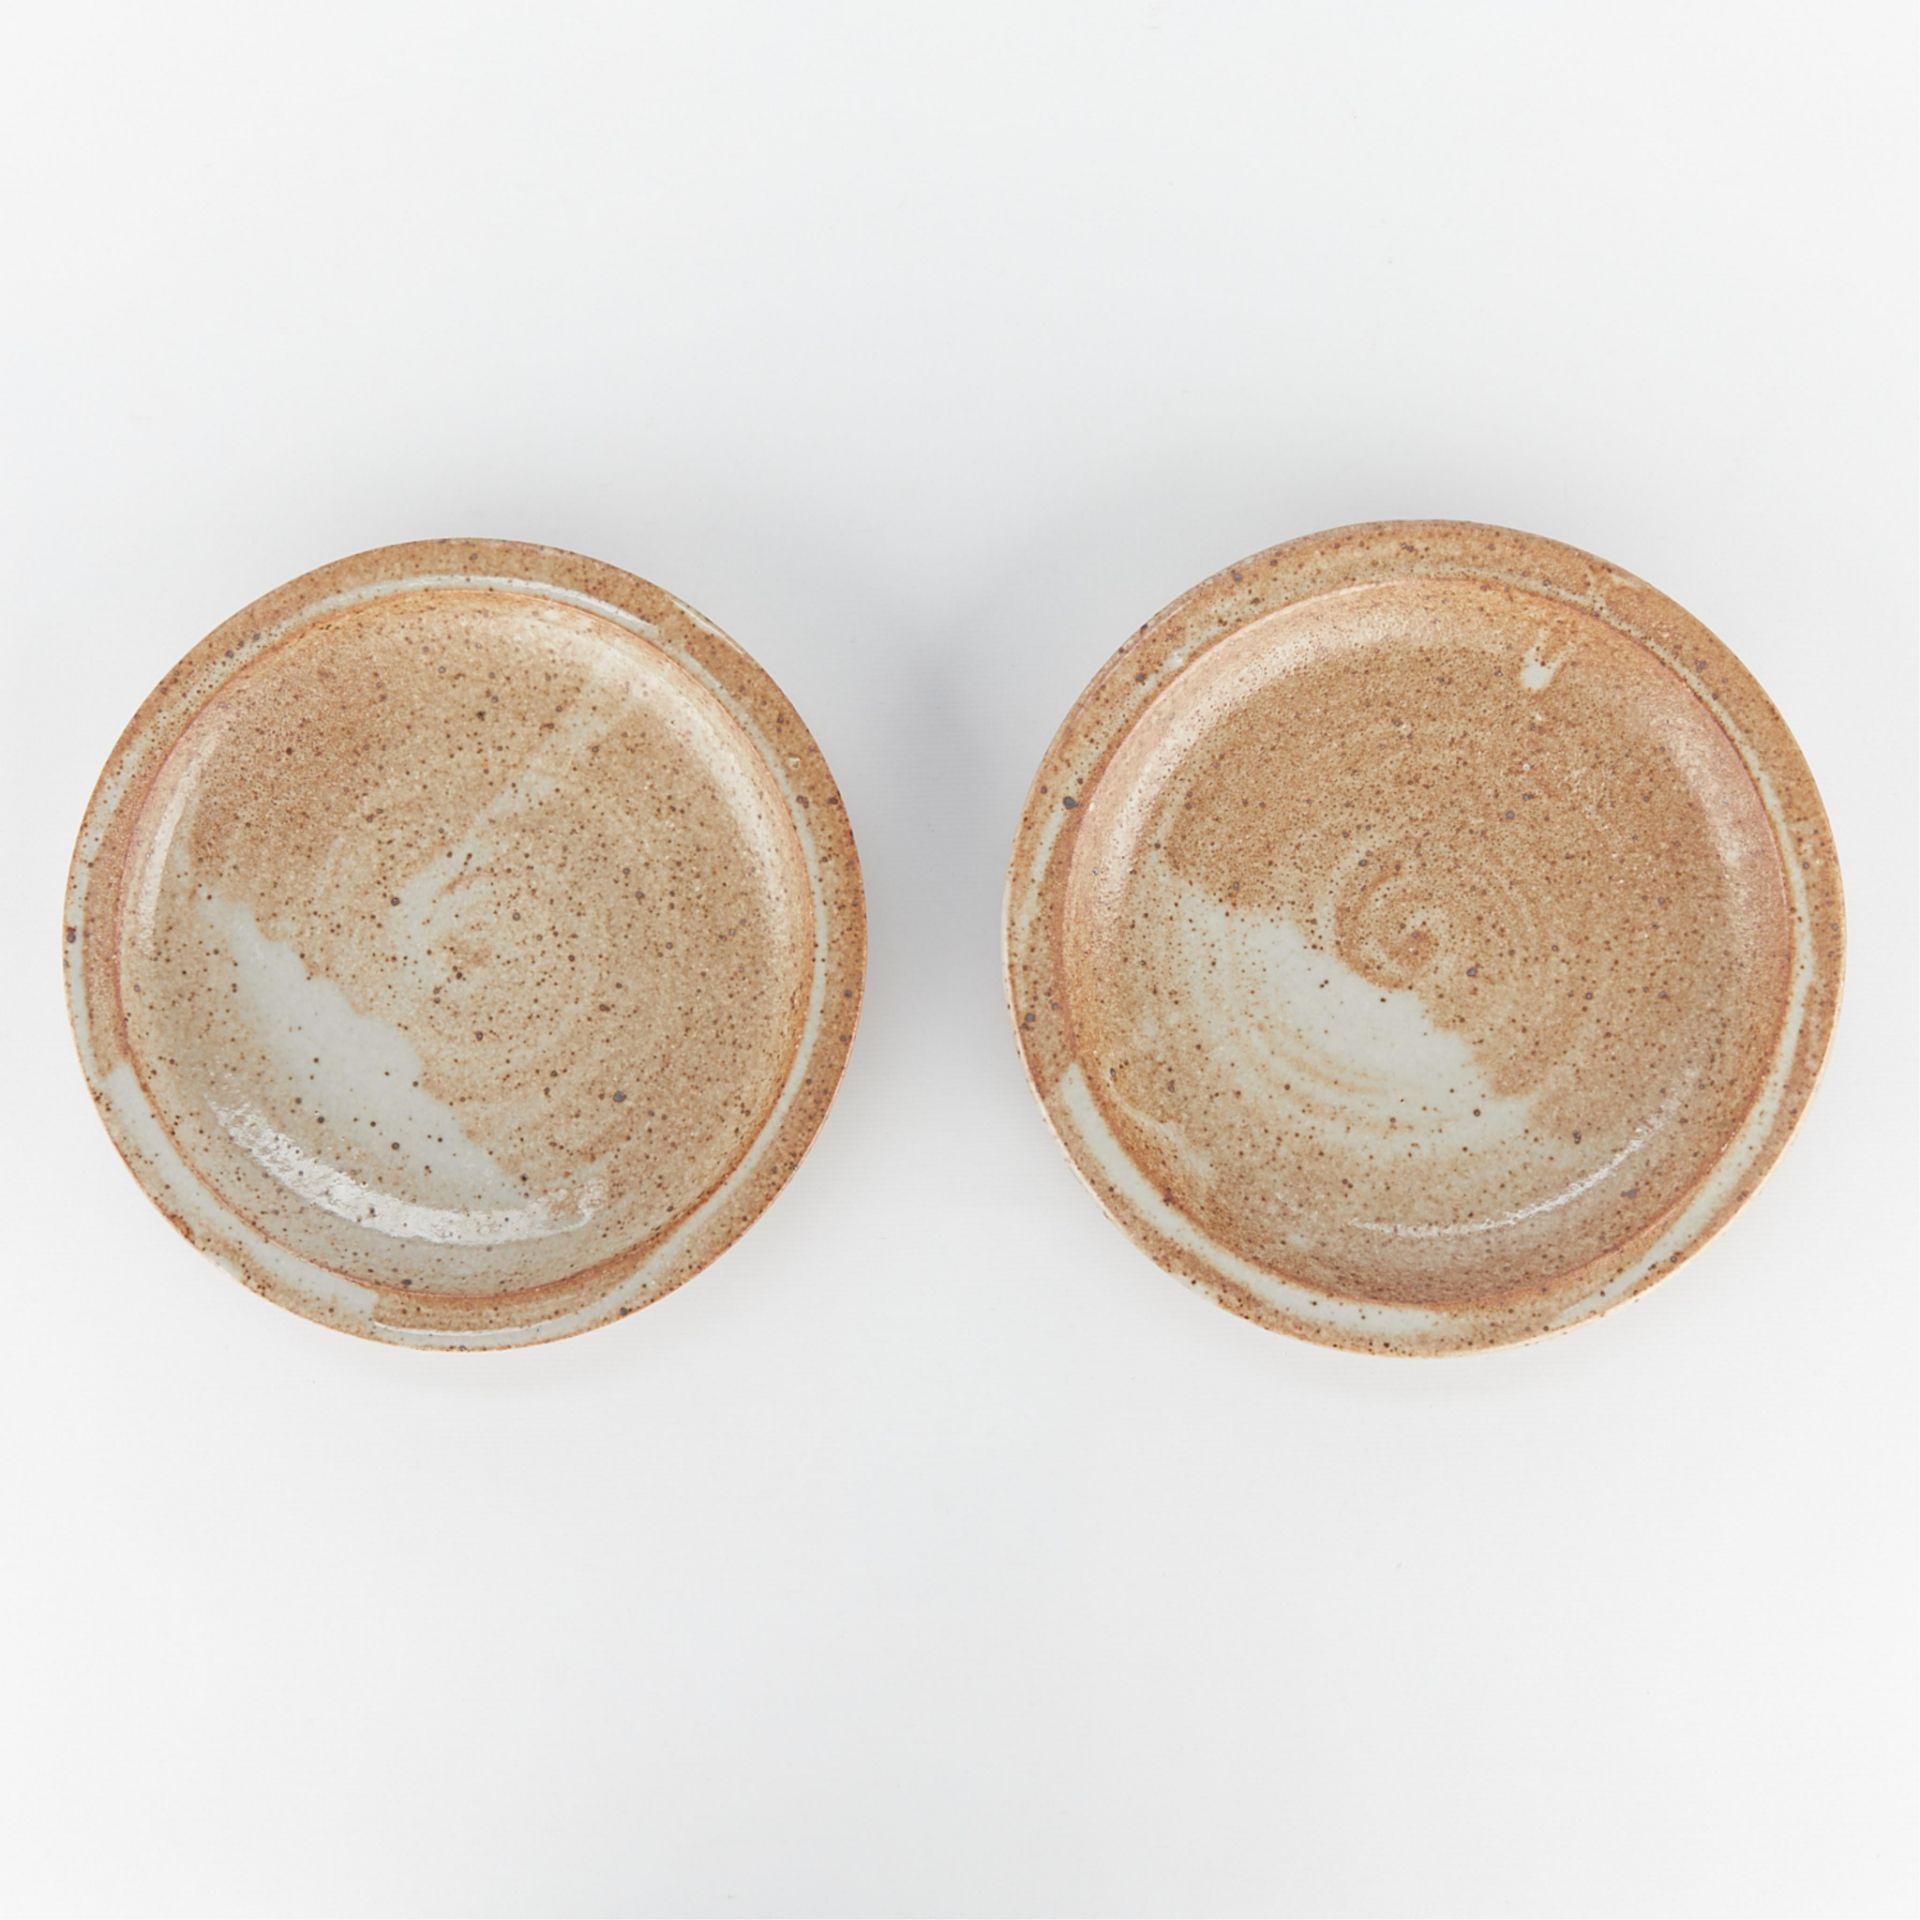 4 Warren MacKenzie Cups and Plates - Stamped - Image 7 of 14